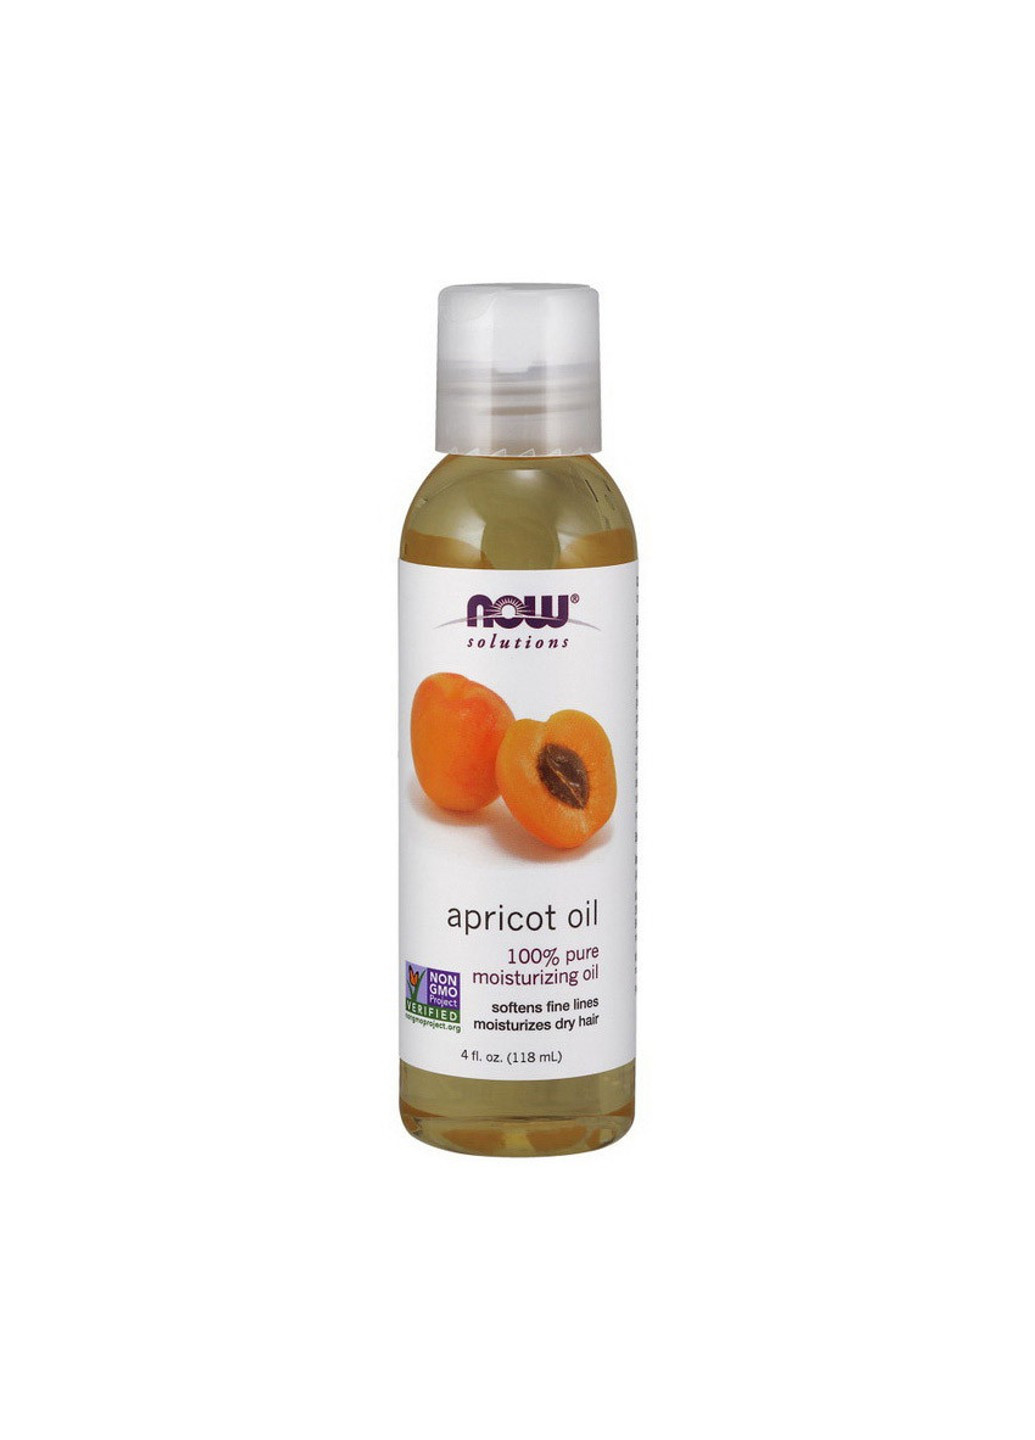 Абрикосовое масло Apricot Oil (118 мл) нау фудс Now Foods (255409637)